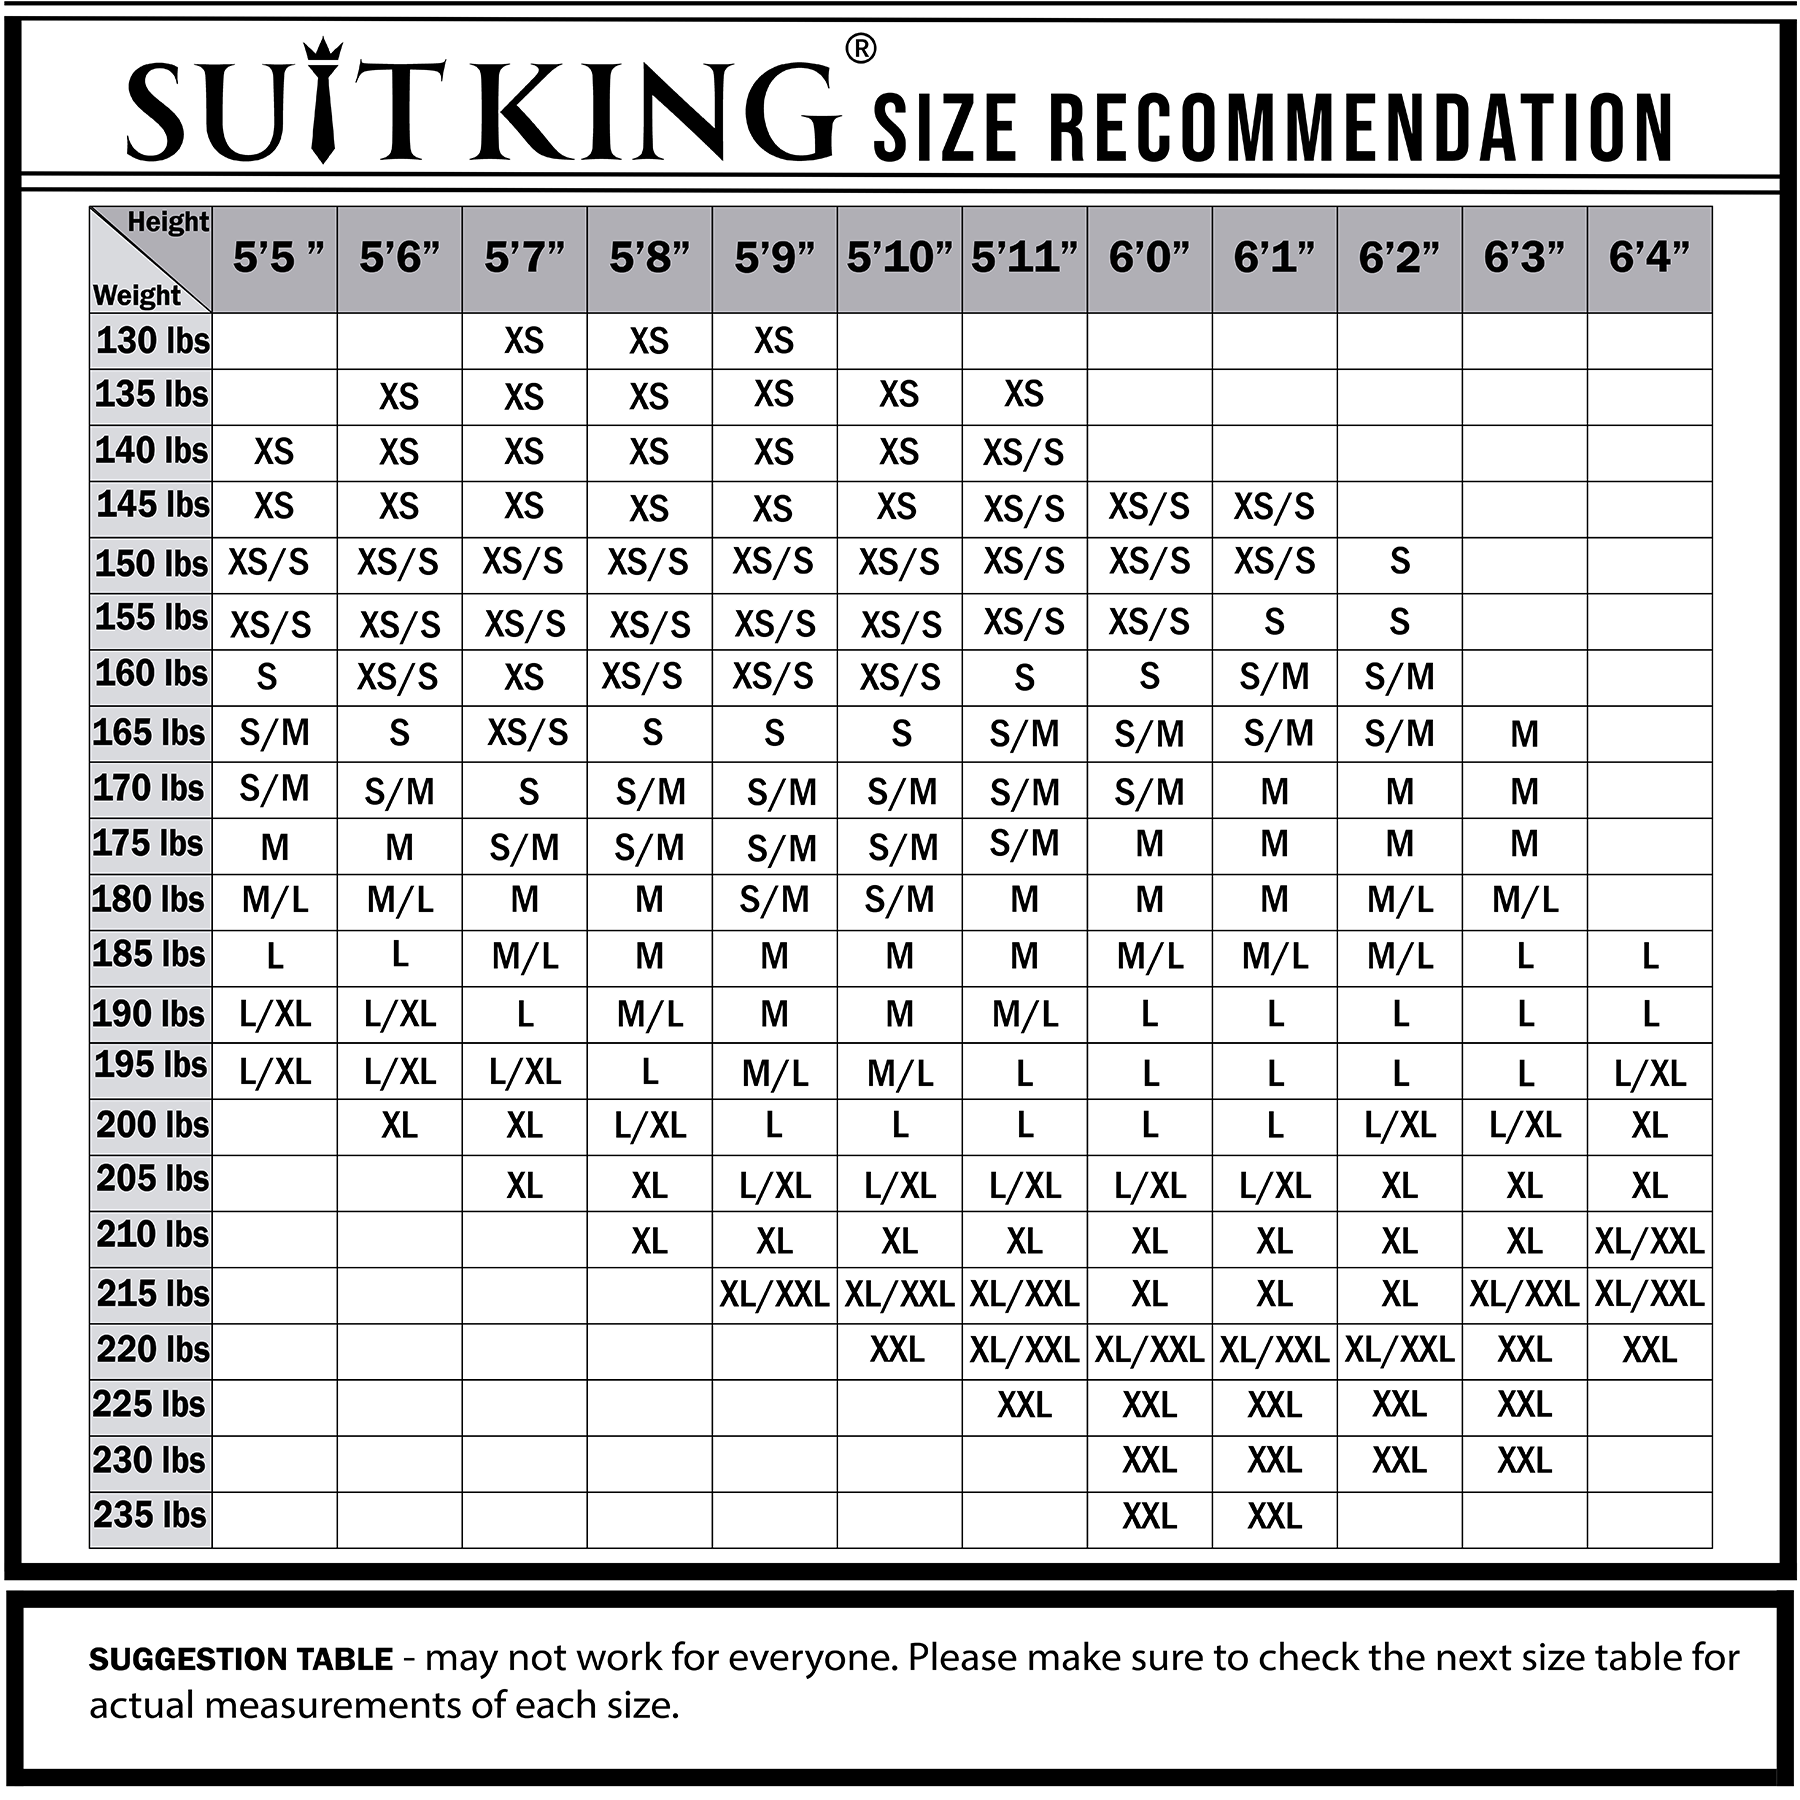 Suit King - 3 Piece Men's Suit, Slim Fit Stylish Jacket, Pants, Vest, 2 Ties, and Belt, Perfect for Weddings, Business and More | Gray